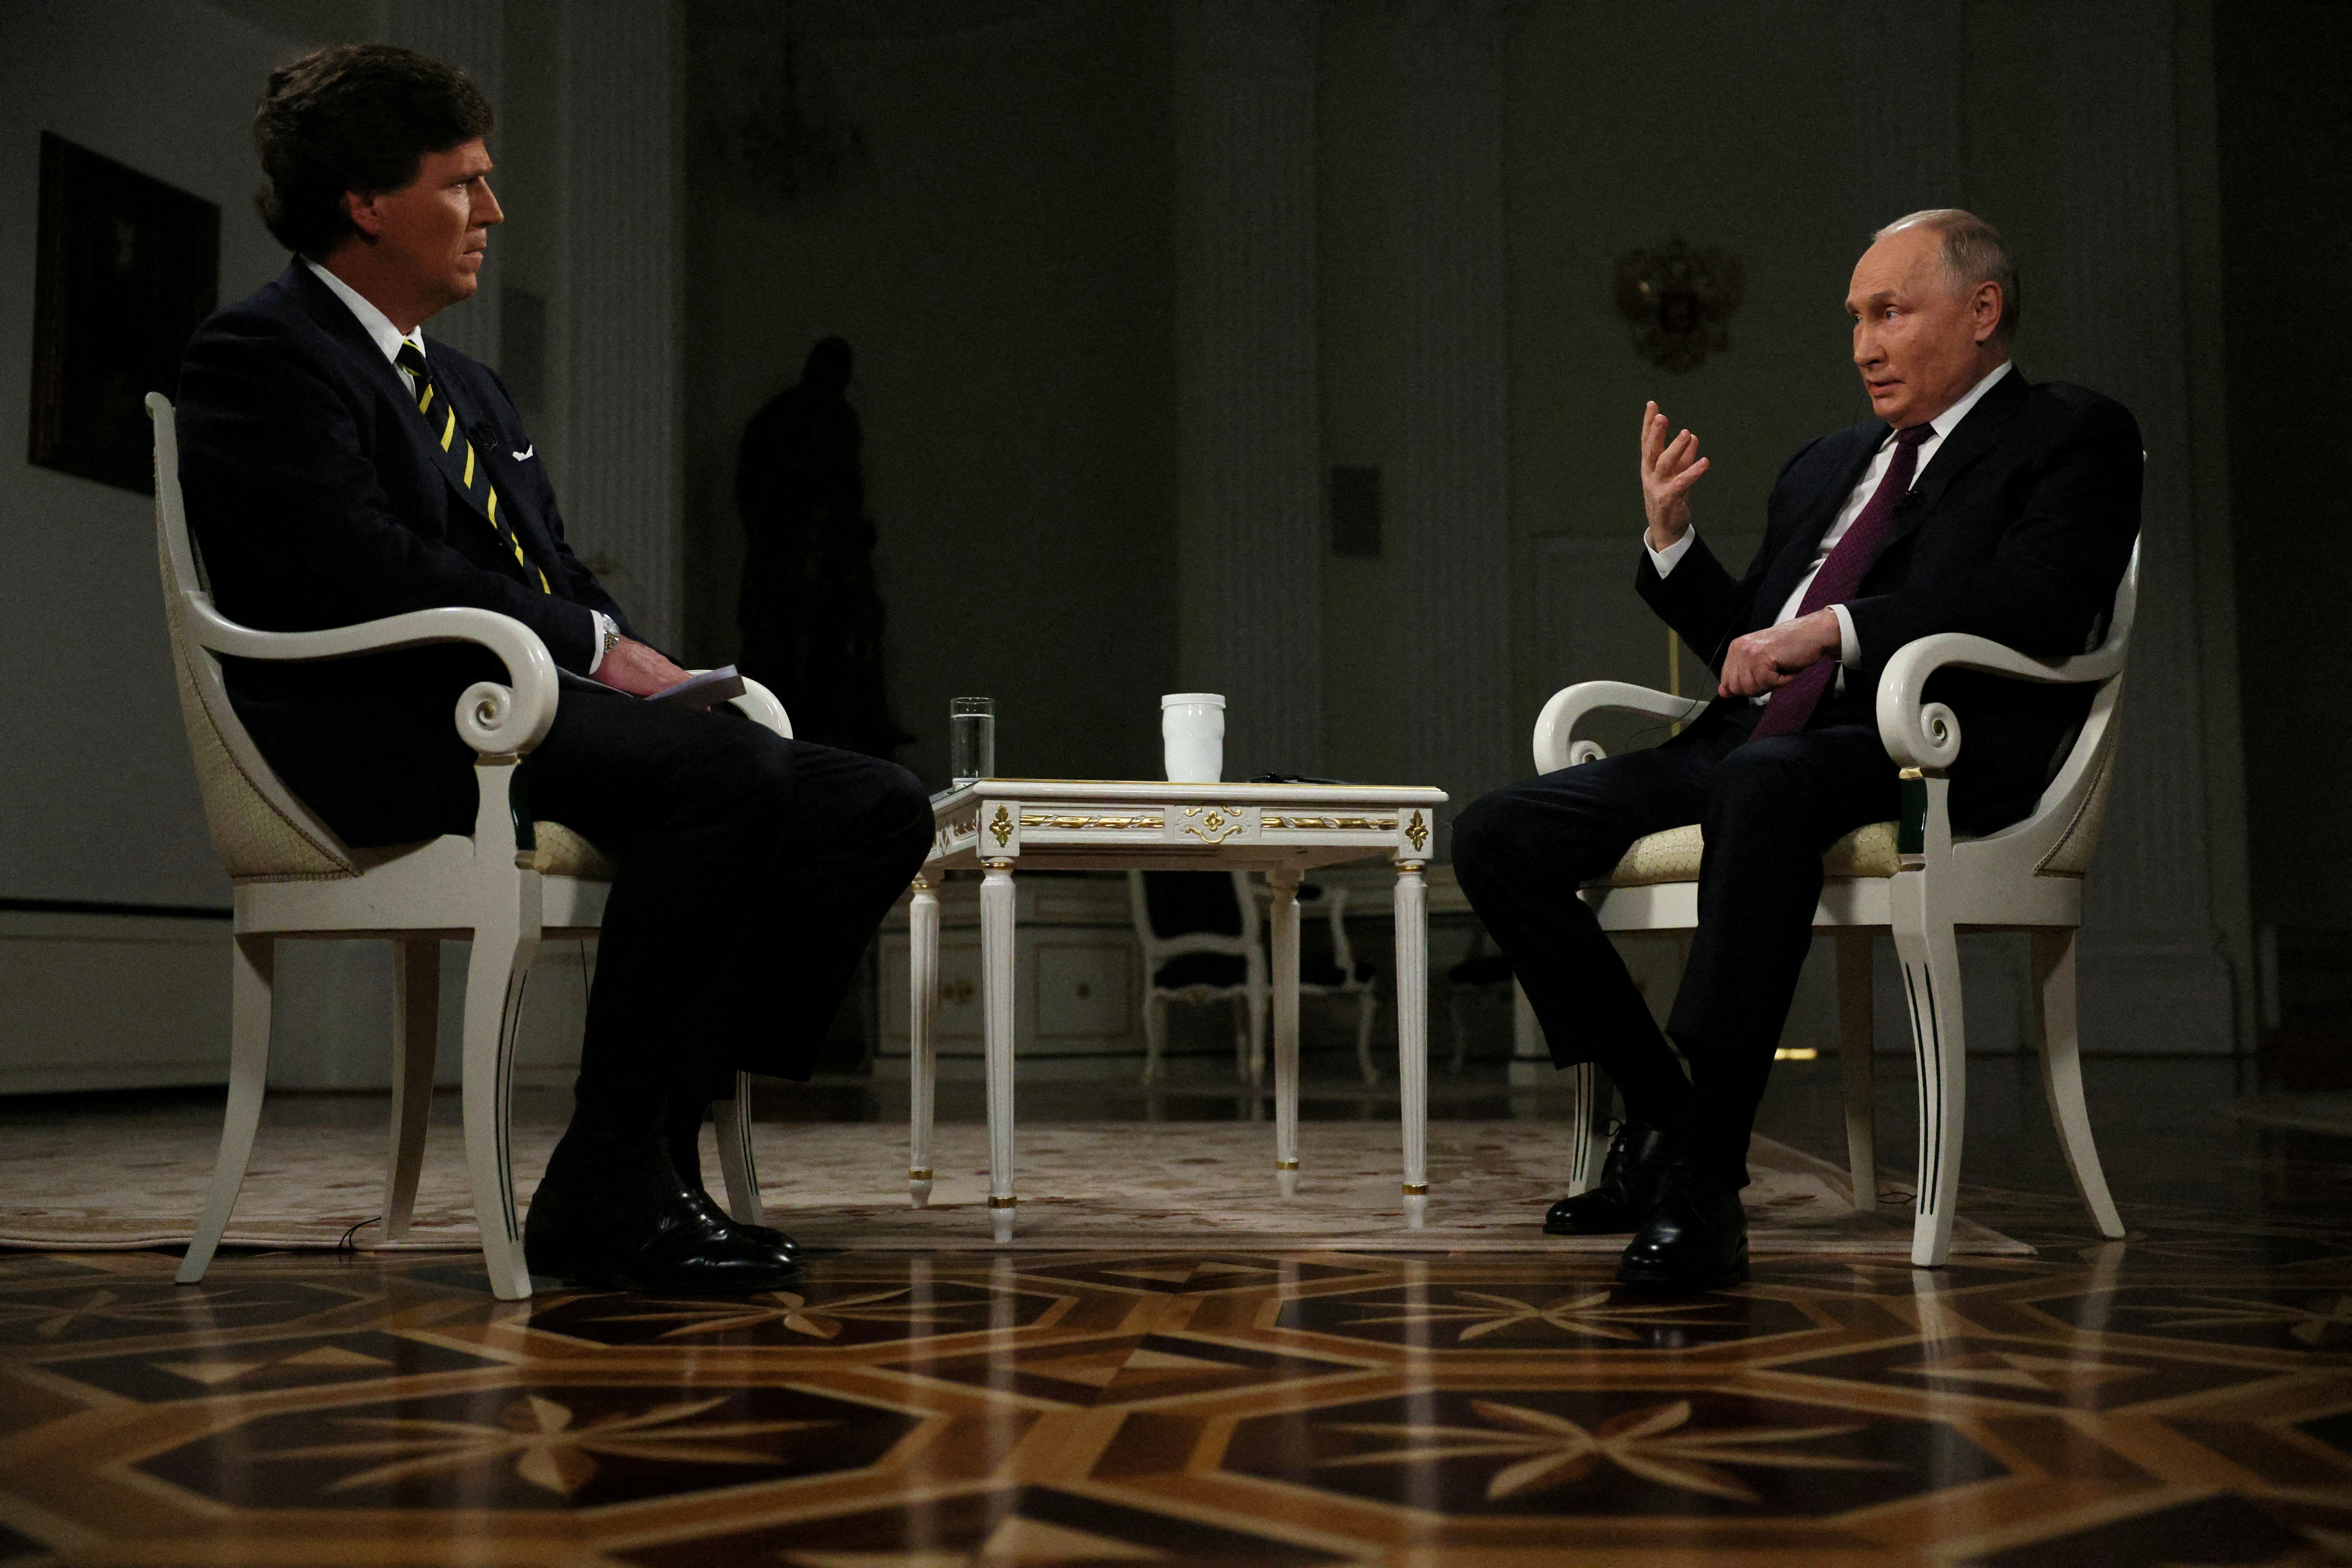 Tucker Carlson’s interview with Putin: Misinformation missile, or missed opportunity?